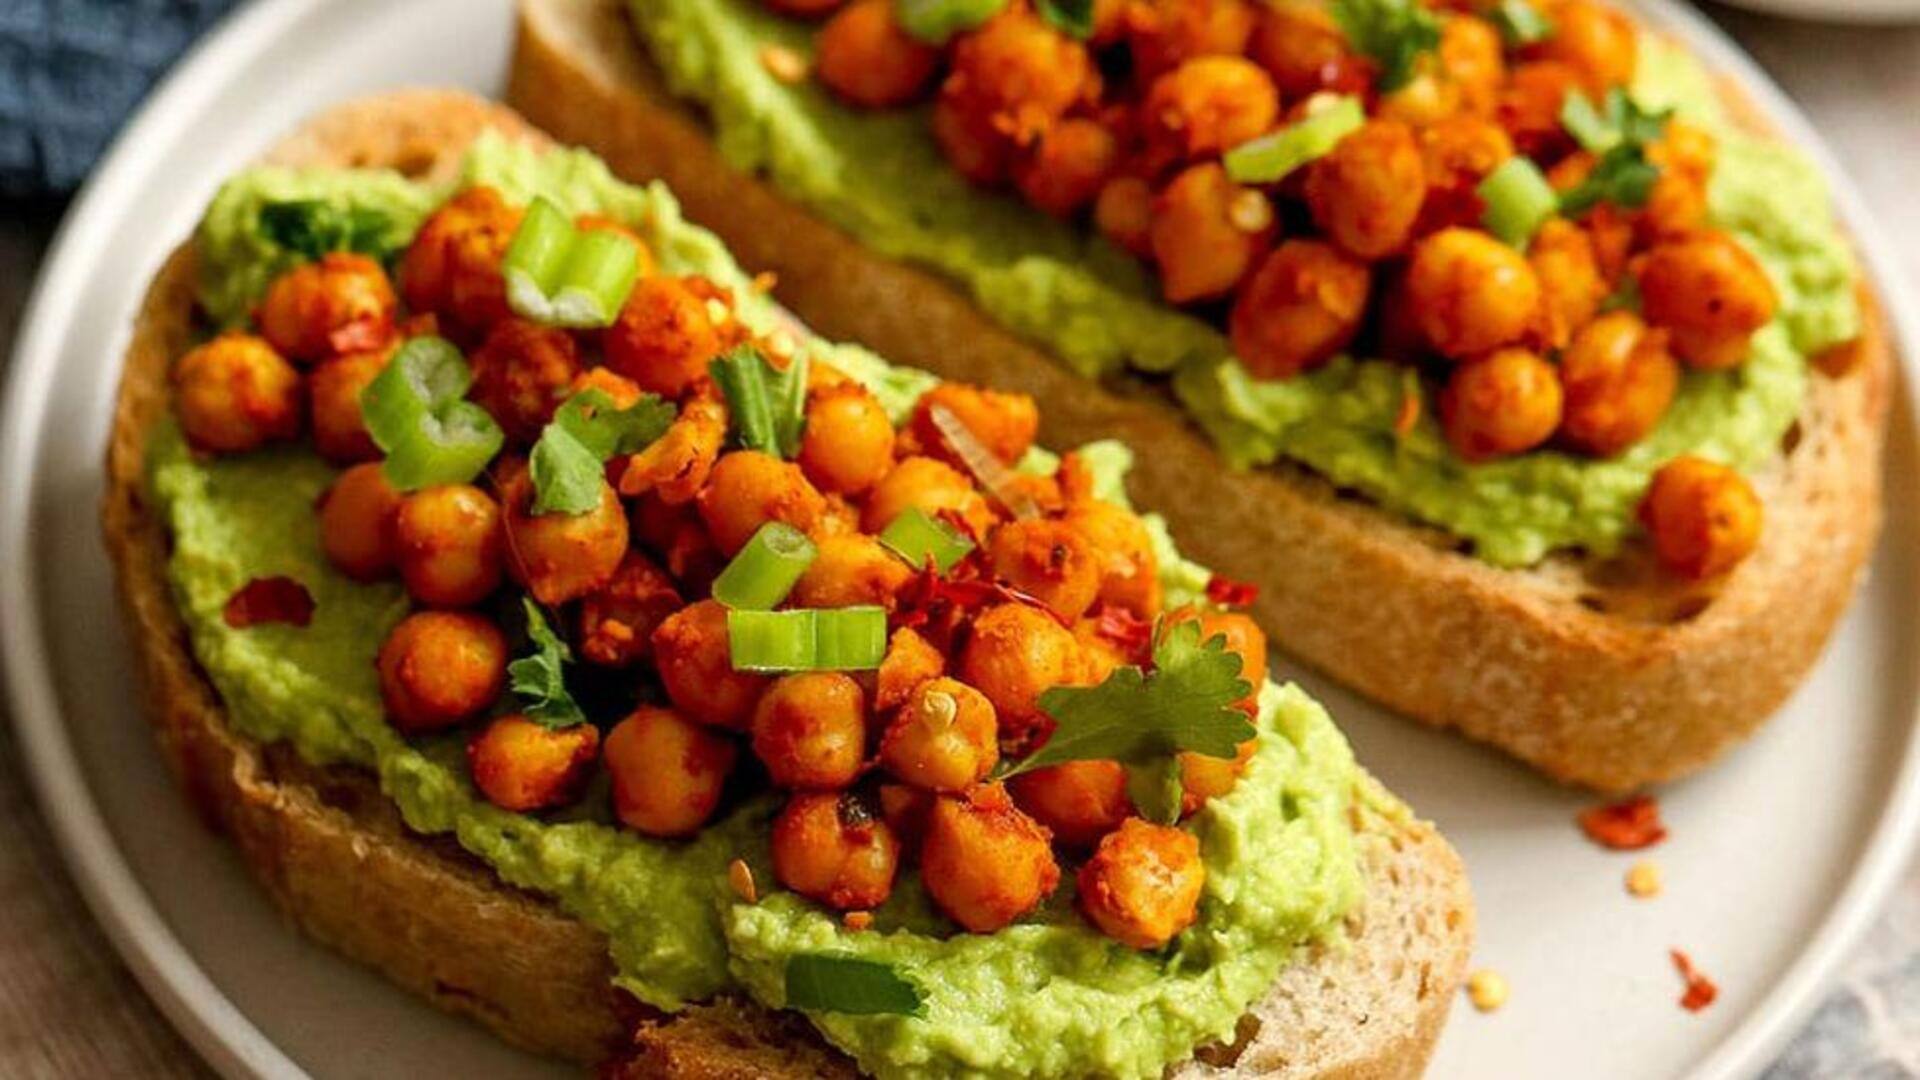 Make this lip-smacking avocado chickpea sandwich at home